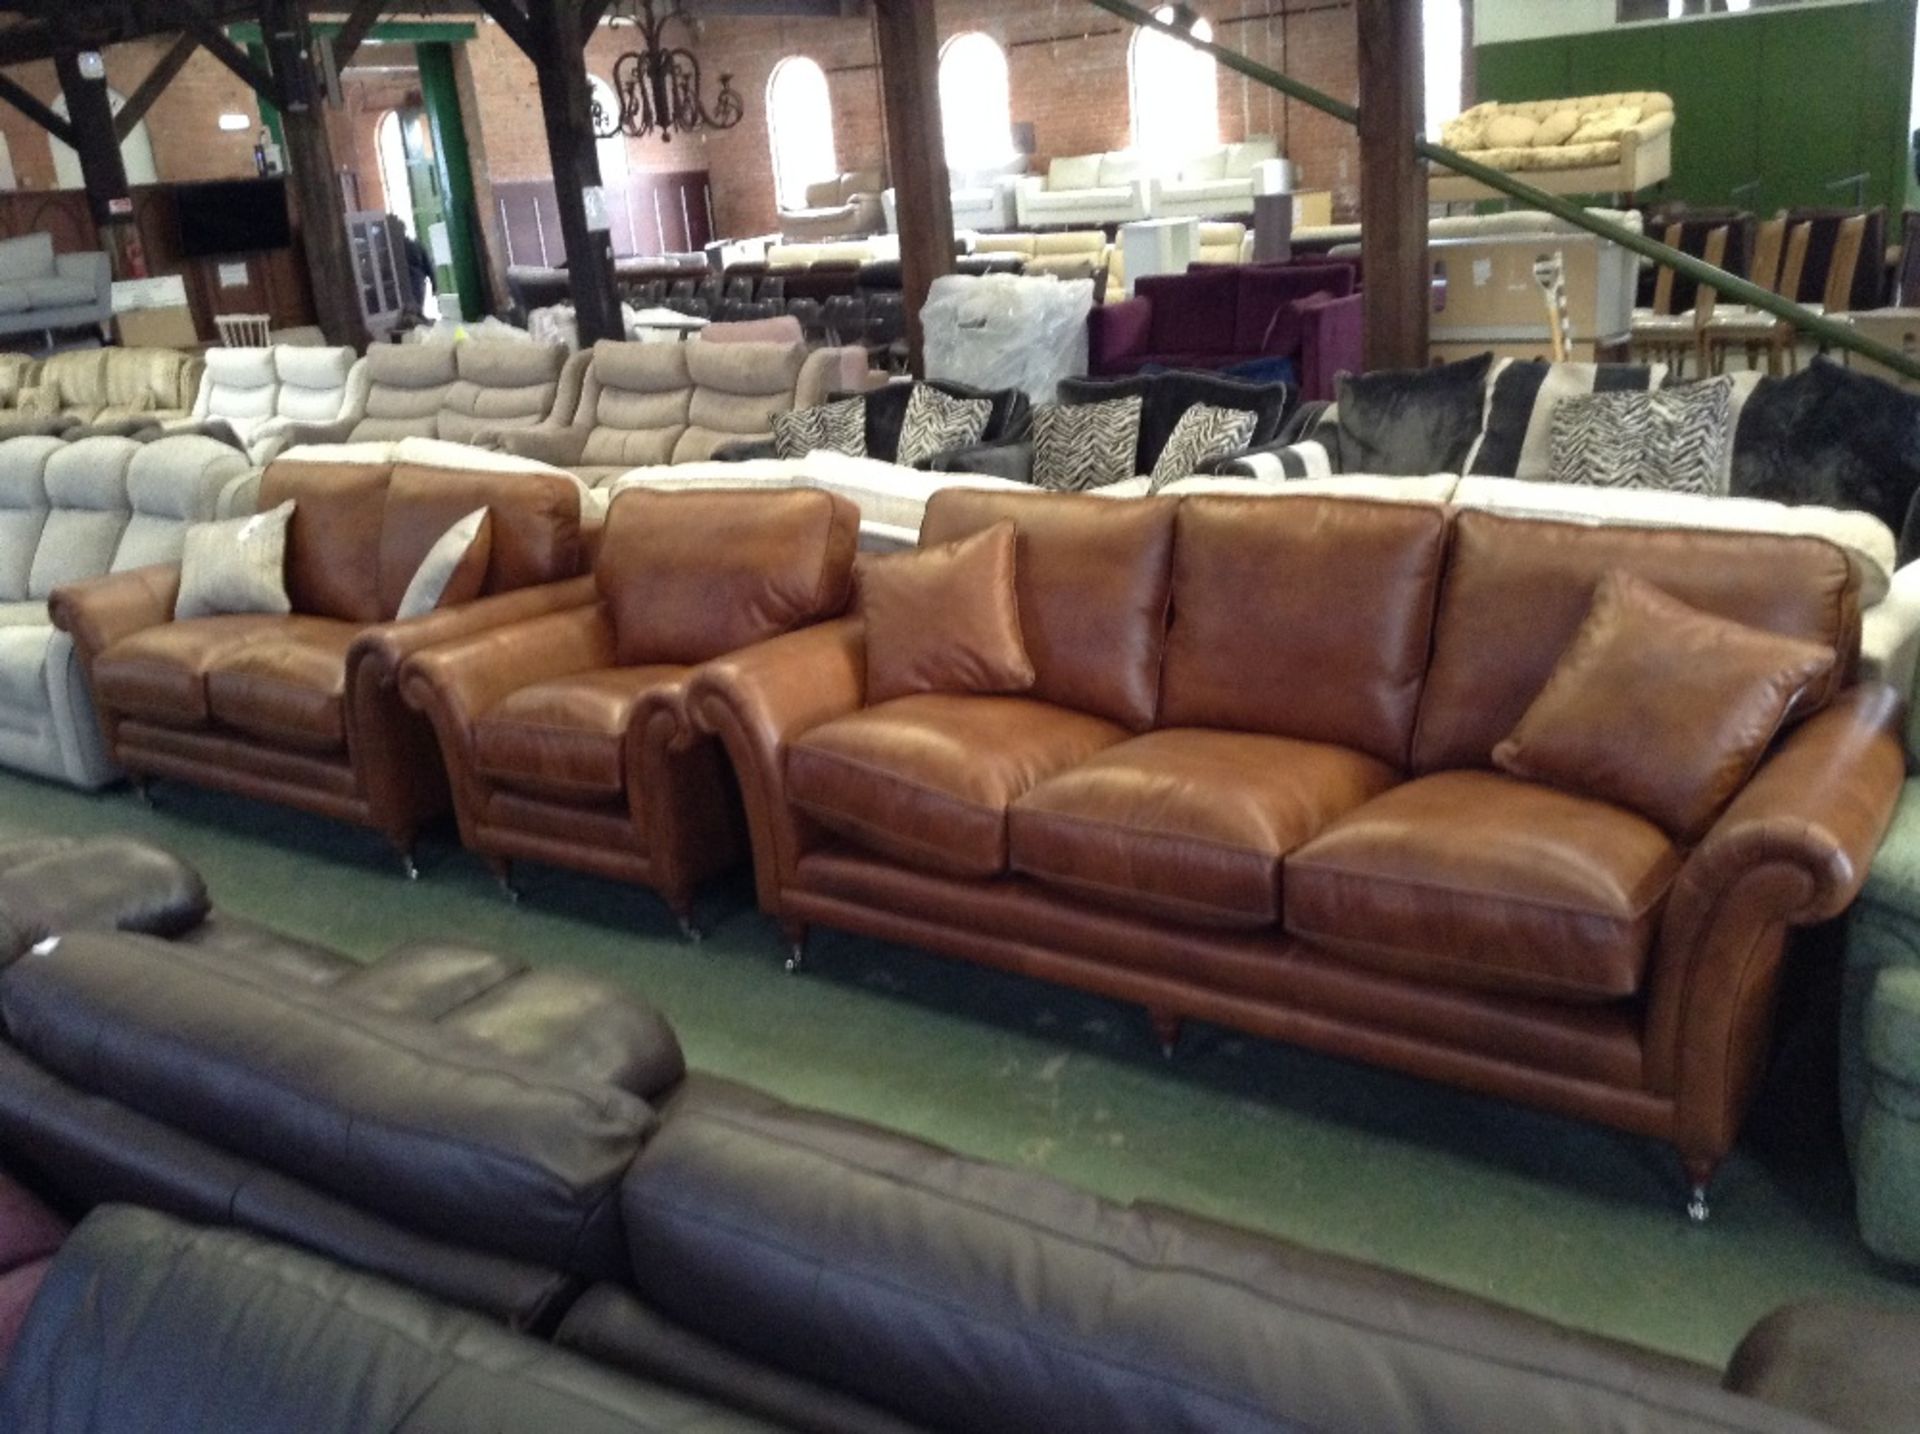 BROWN LEATHER 3 SEATER SOFA, 2 SEATER SOFA AND CHA